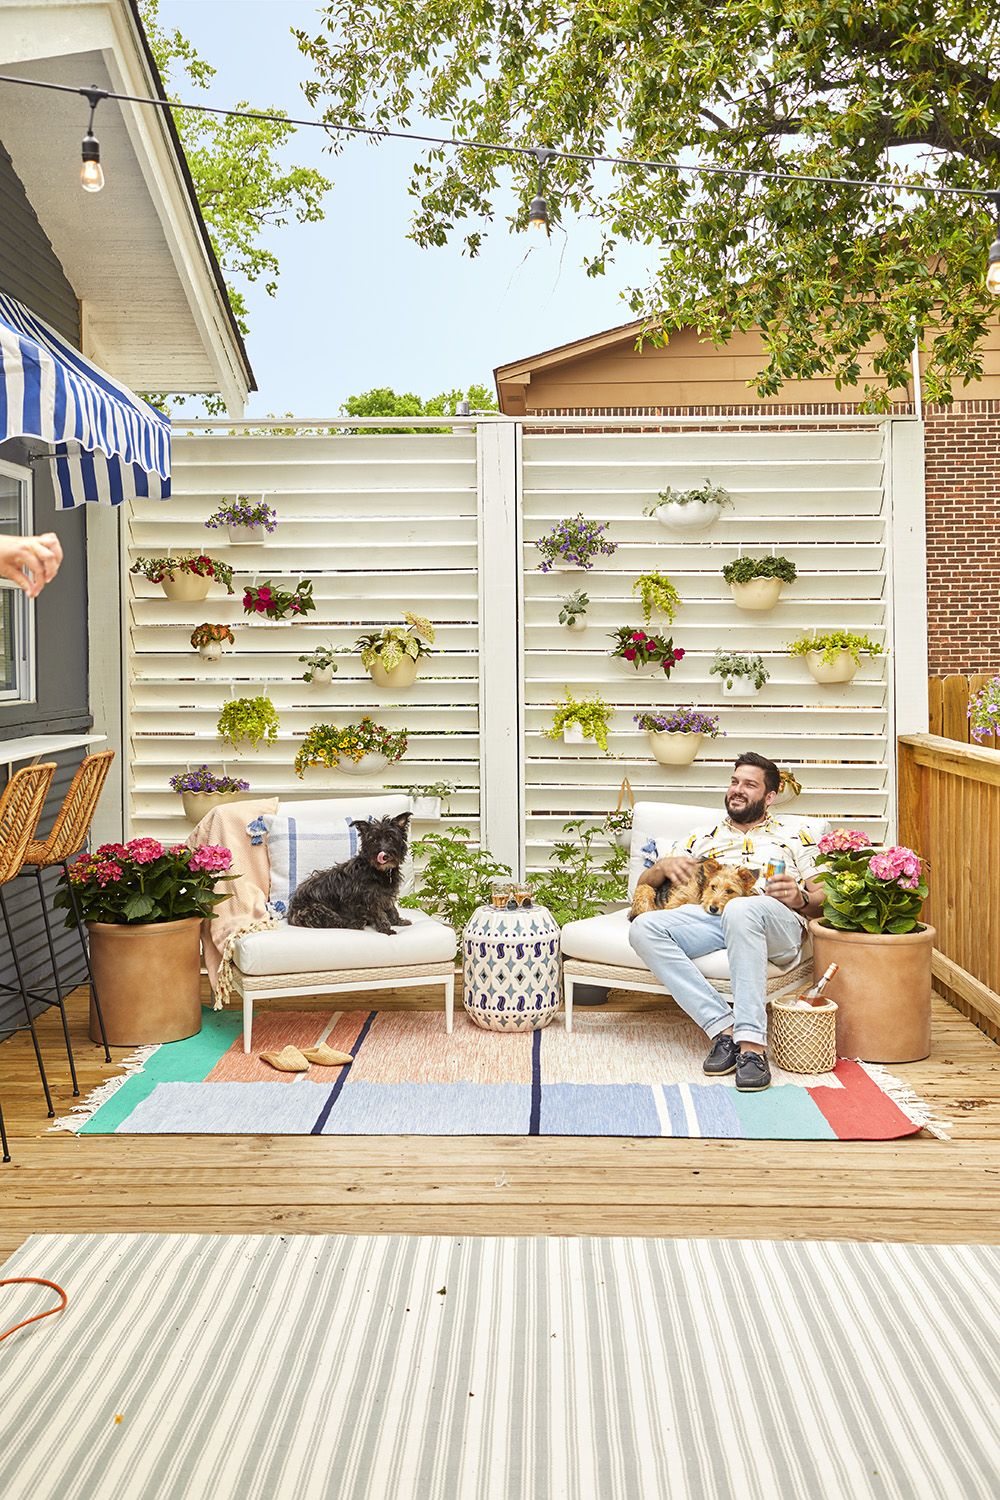 50 Best Patio And Porch Design Ideas, Outdoor Deck Furnishing Ideas